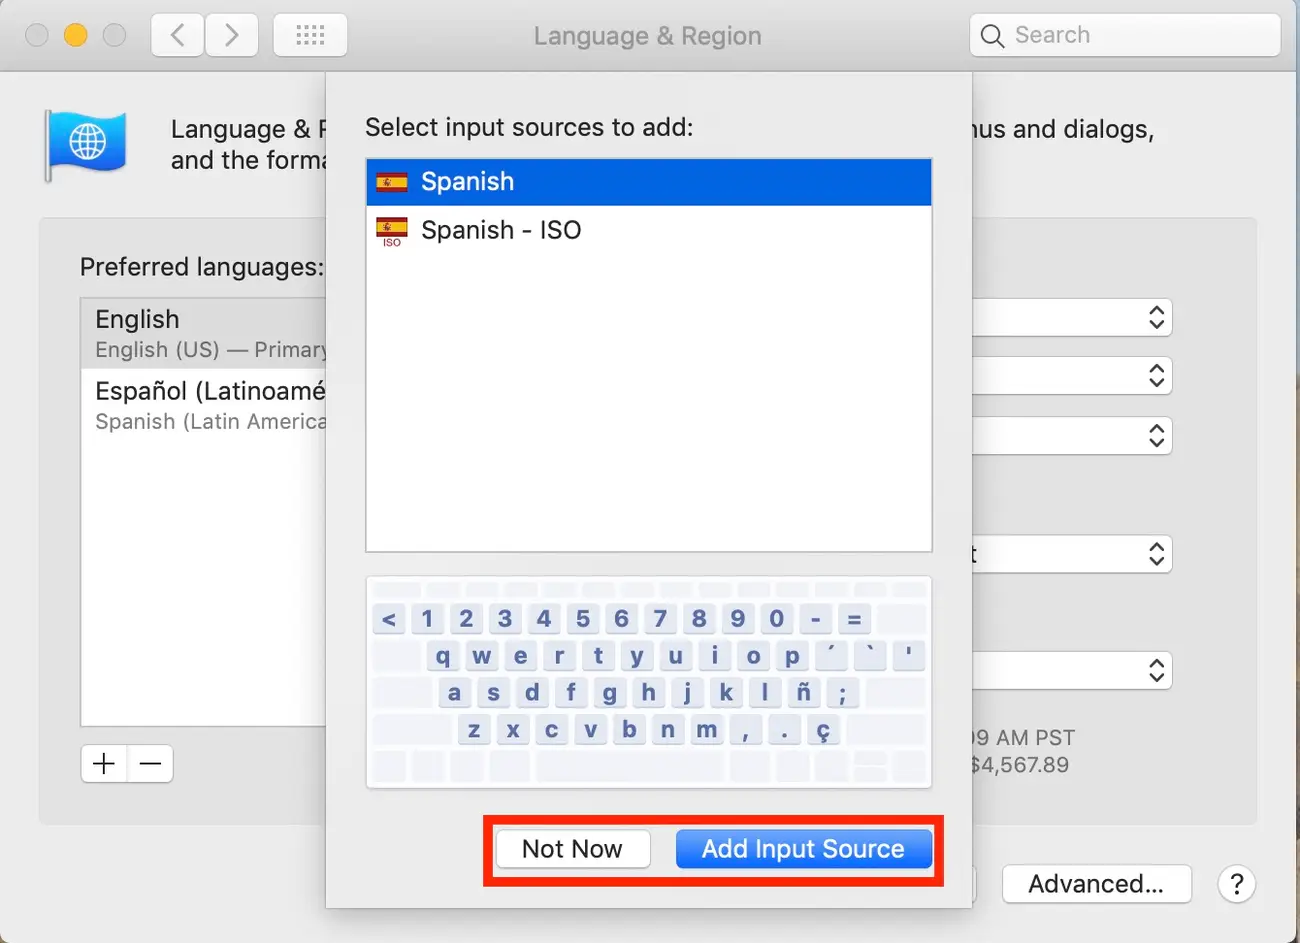 Previous OSX language selector with flag icon